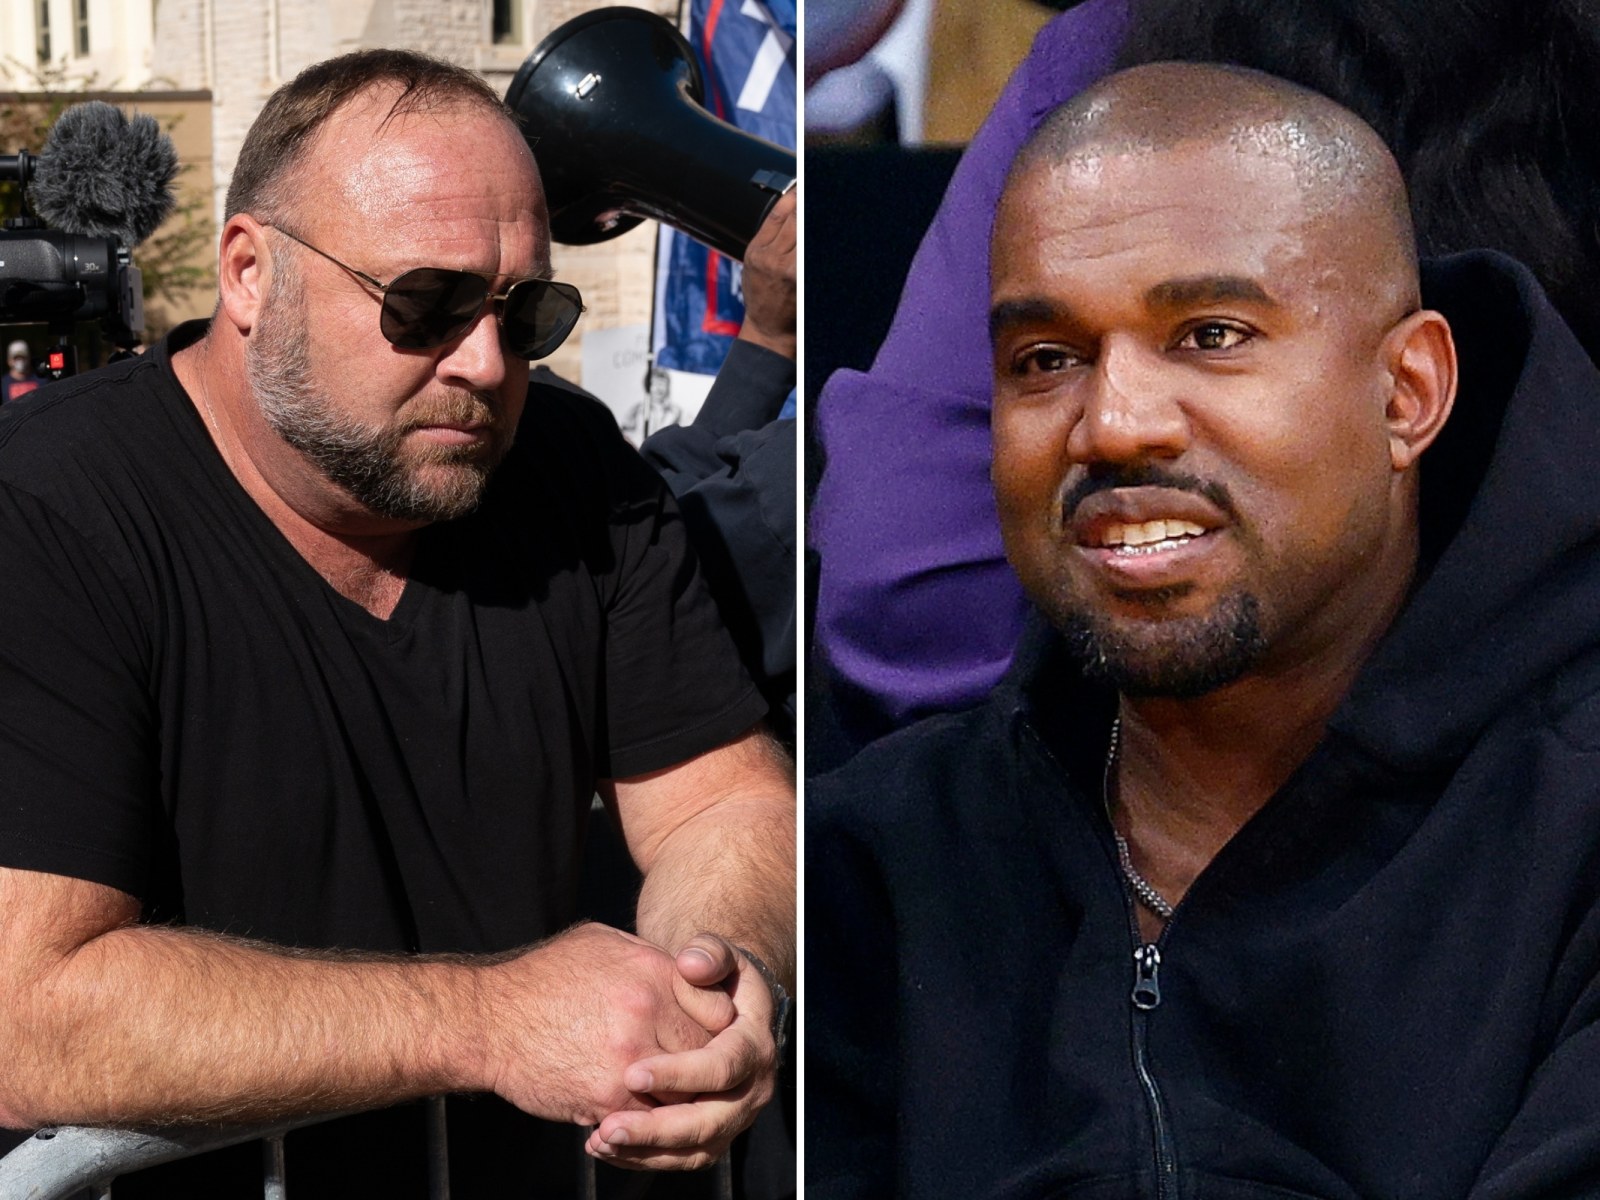 [WATCH/COMMENTARY] Alex Jones Files For Personal Bankruptcy After Crazy Kanye Interview